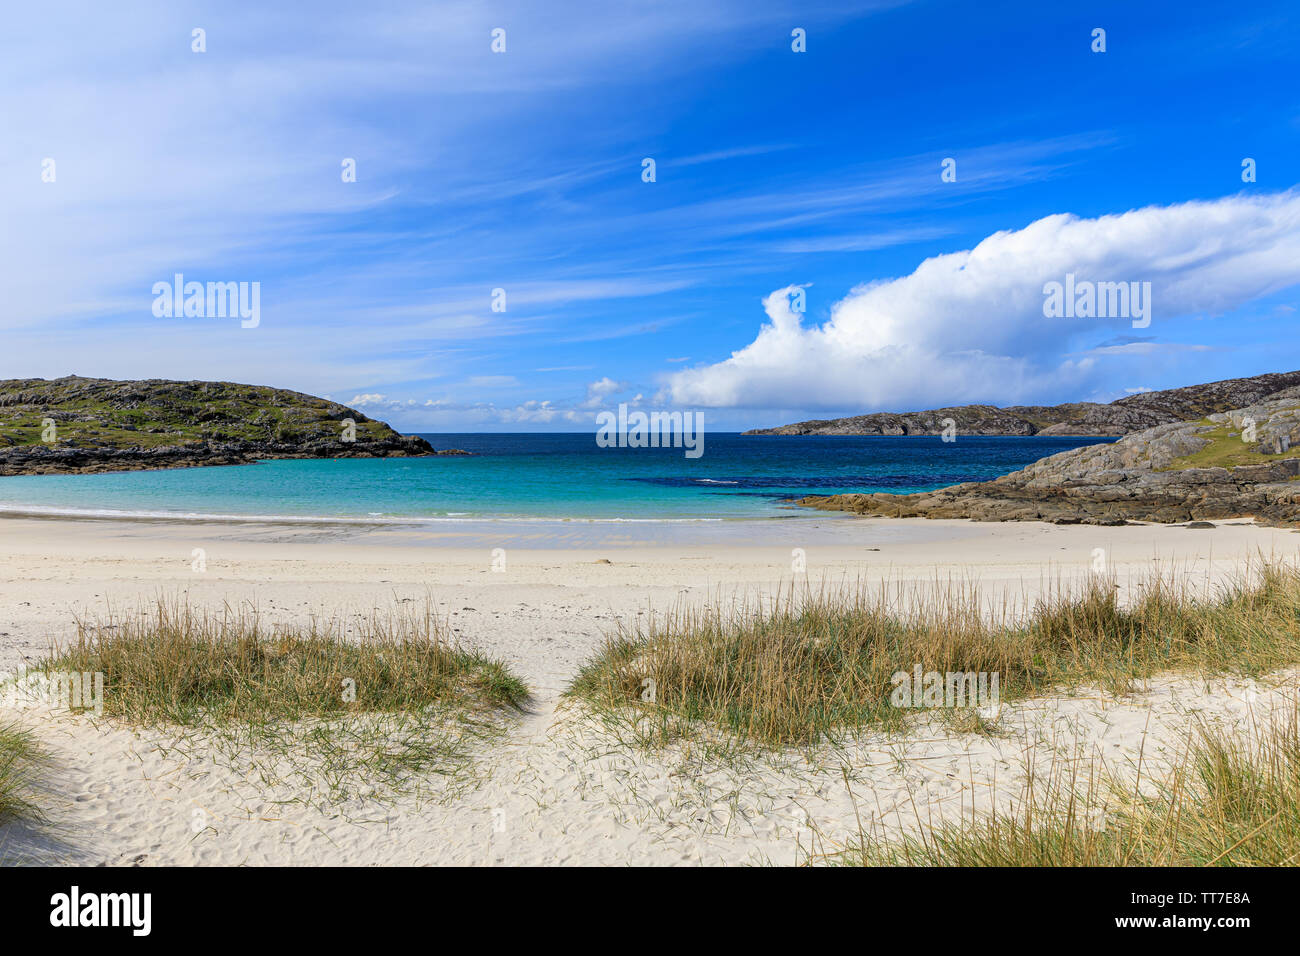 The view of Achmelvich beach from the Dunes, Lochinver, Scotland, UK Stock Photo